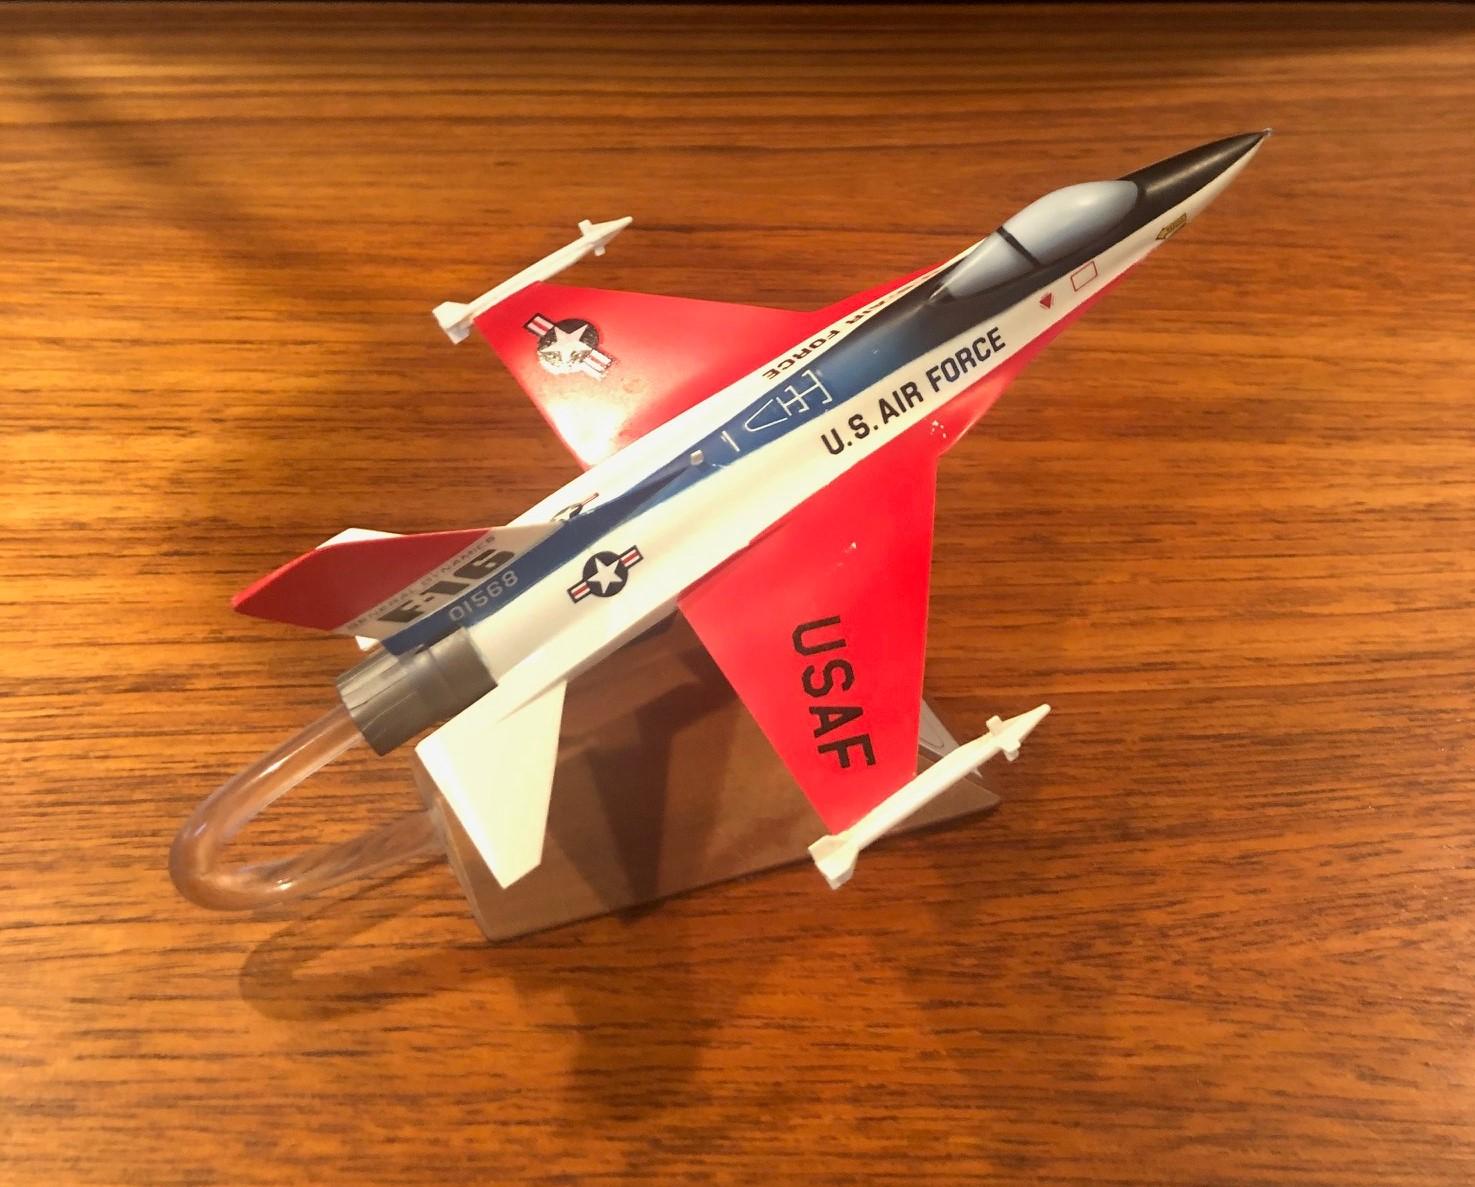 20th Century U.S. Air Force F-16 Air Combat Fighter Contractor Desk Model